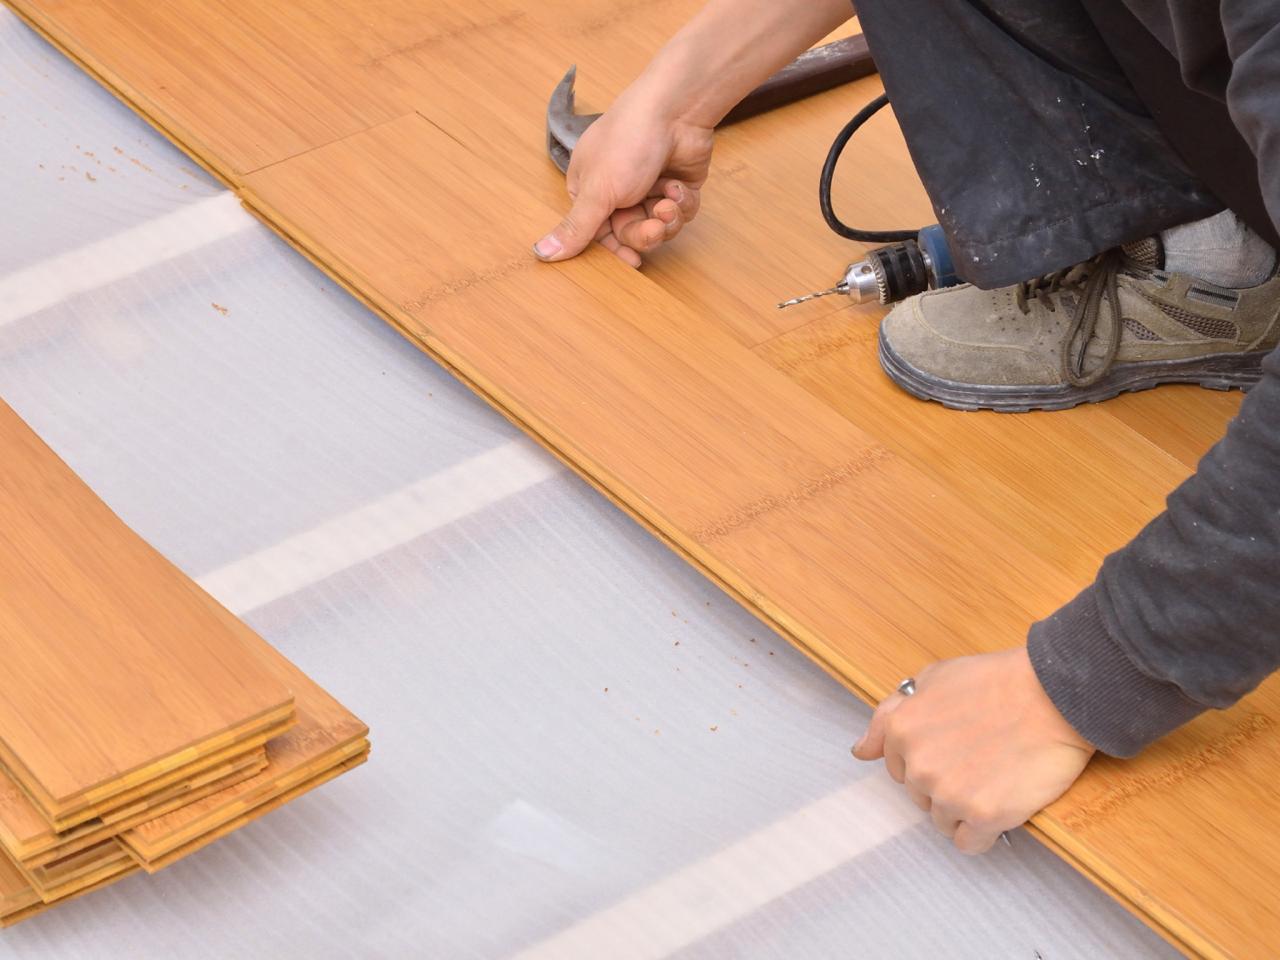 Bamboo Floor Installation Diy, How To Install Engineered Wood Flooring Floating On Concrete